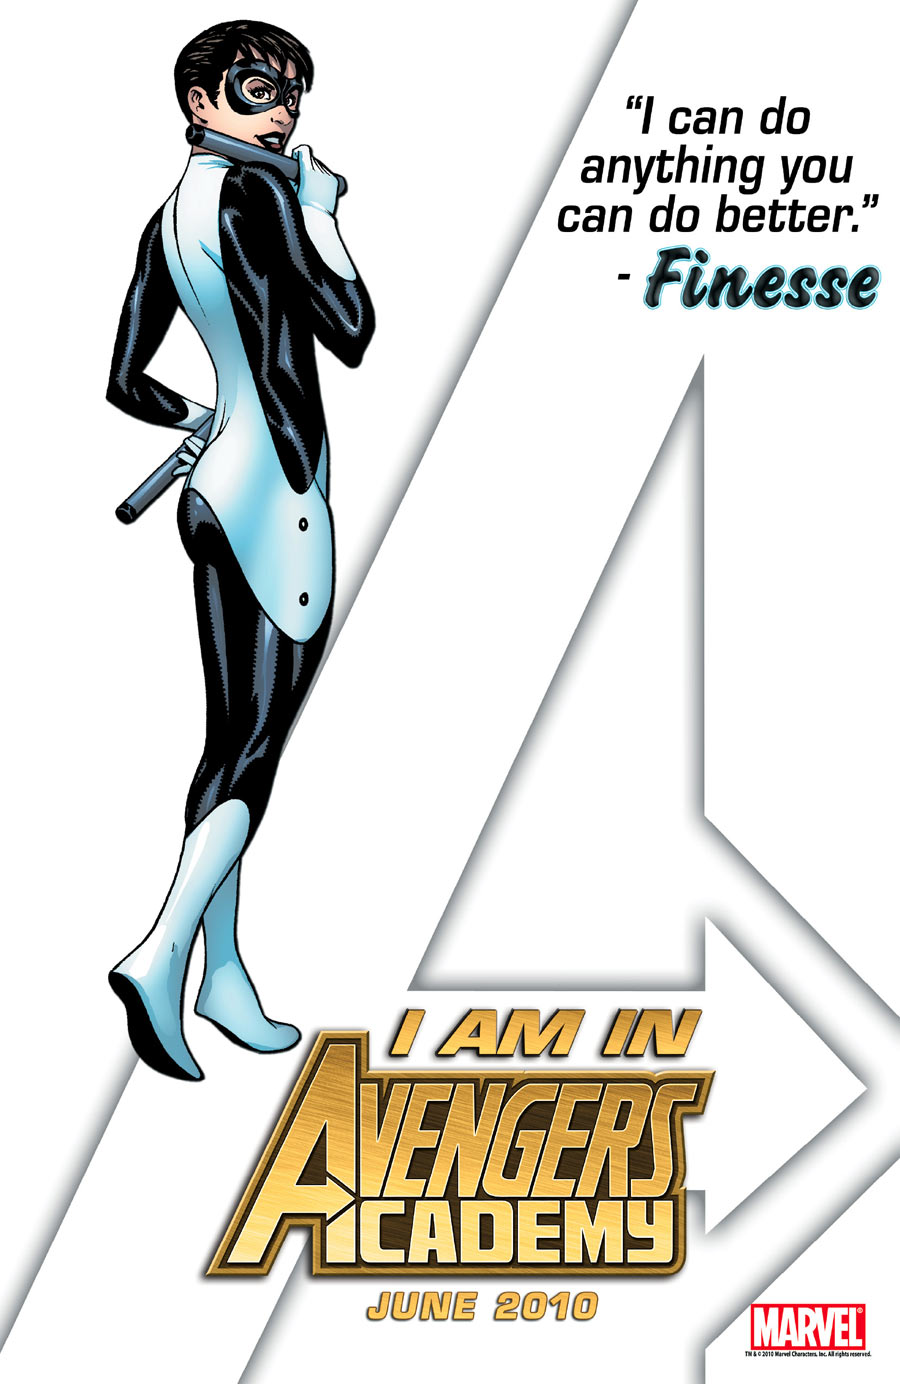 Avengers Academy: Finesse